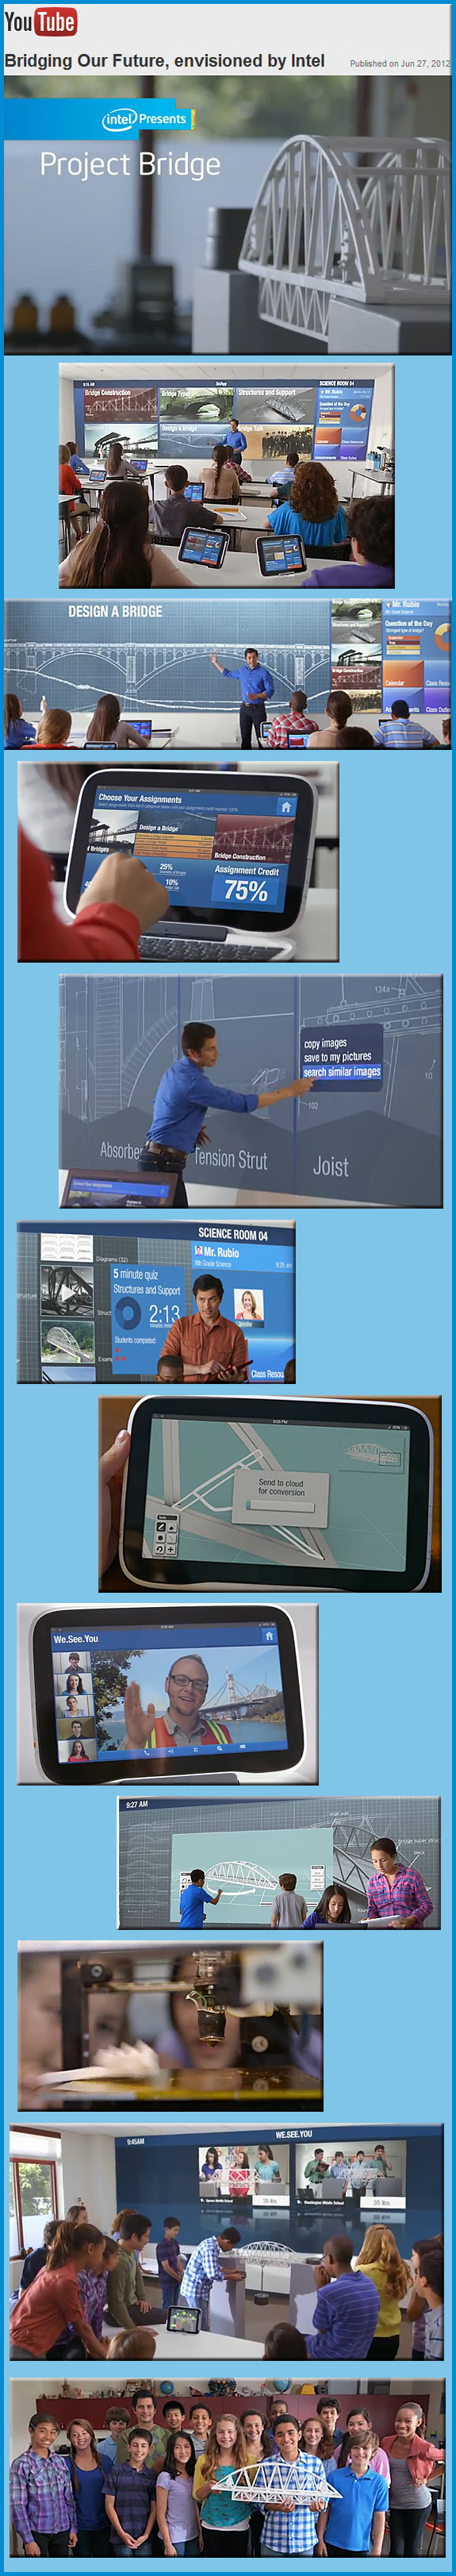 Bridging Our Future, envisioned by Intel  -- June 2012